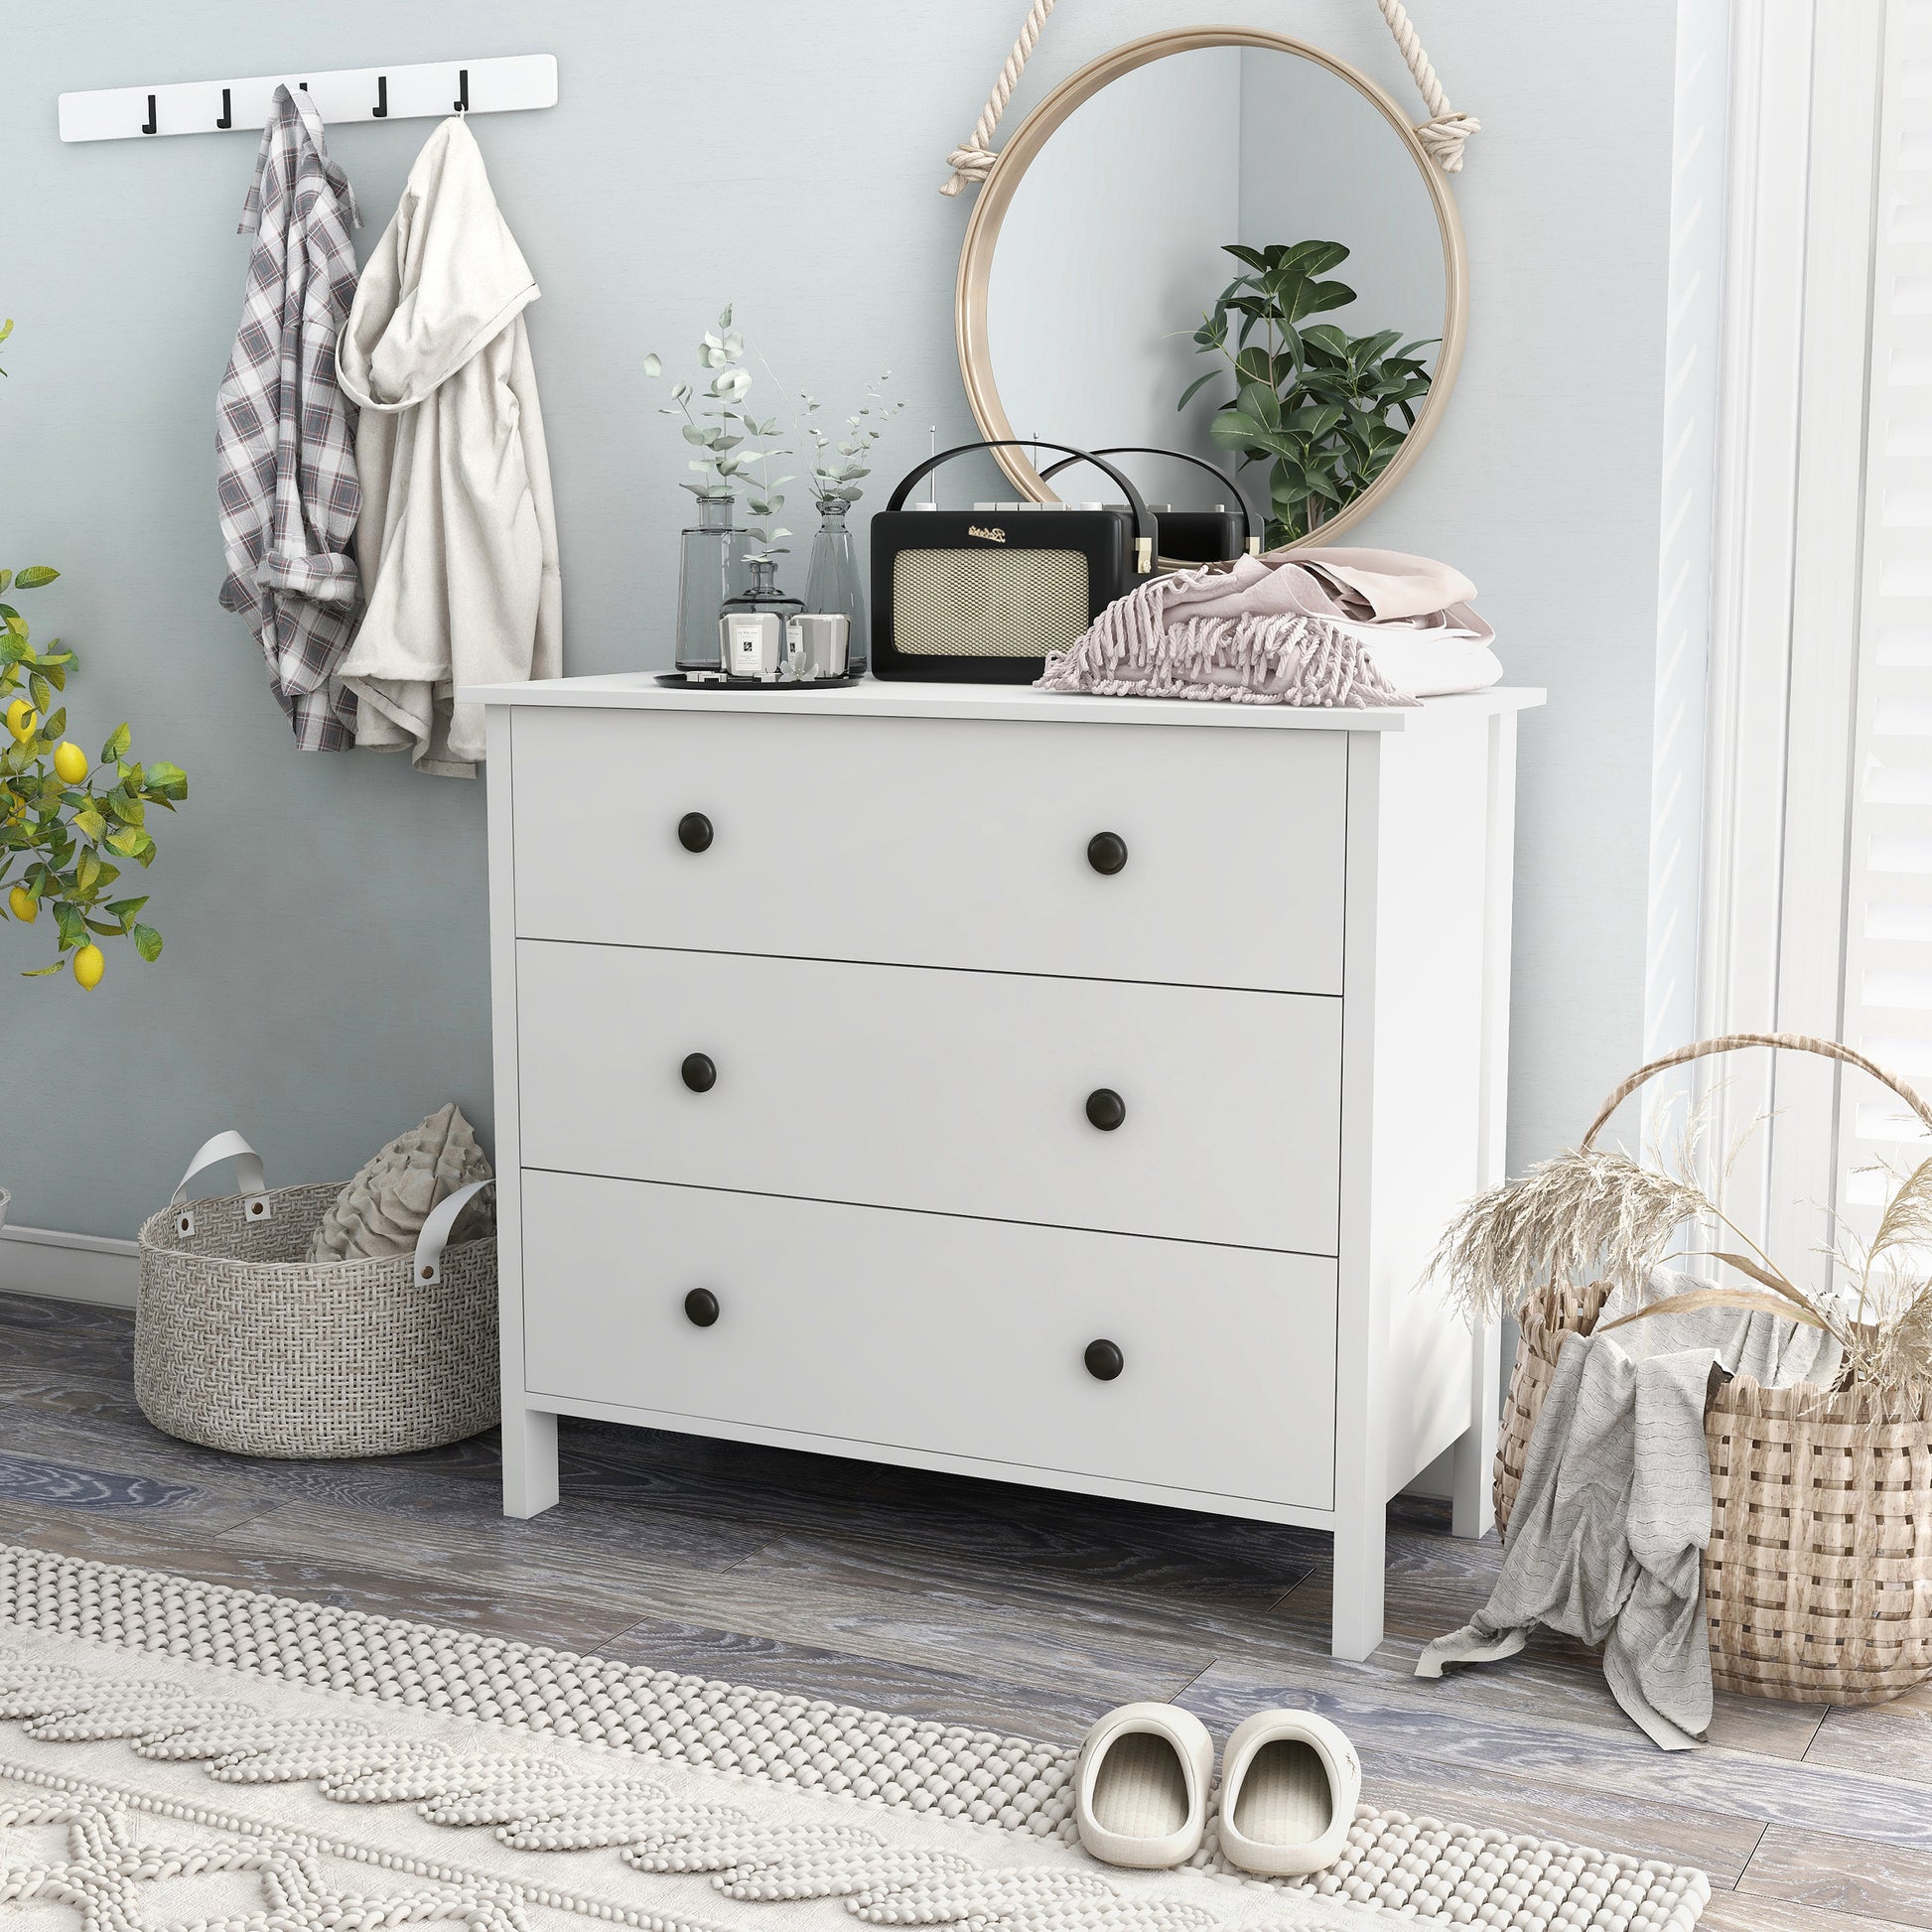 Left angled transitional white three-drawer youth dresser in a bedroom with accessories